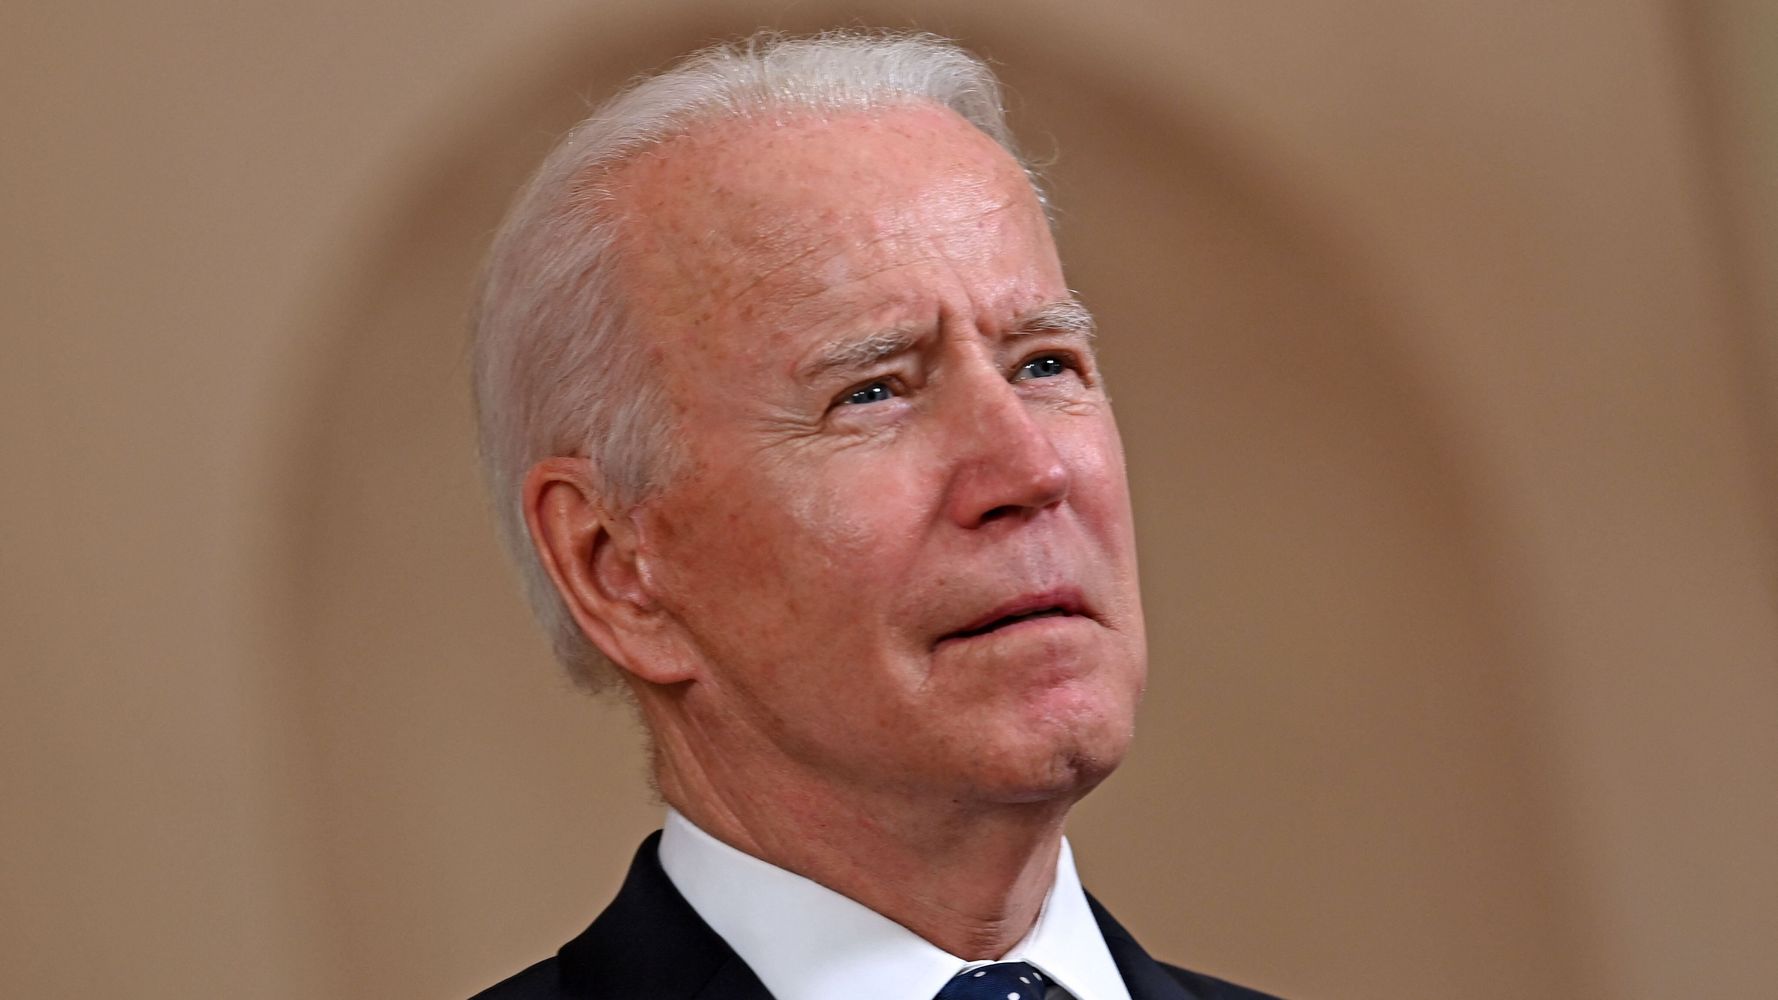 Biden To Sign $15 Minimum Wage Executive Order For Federal Contractors